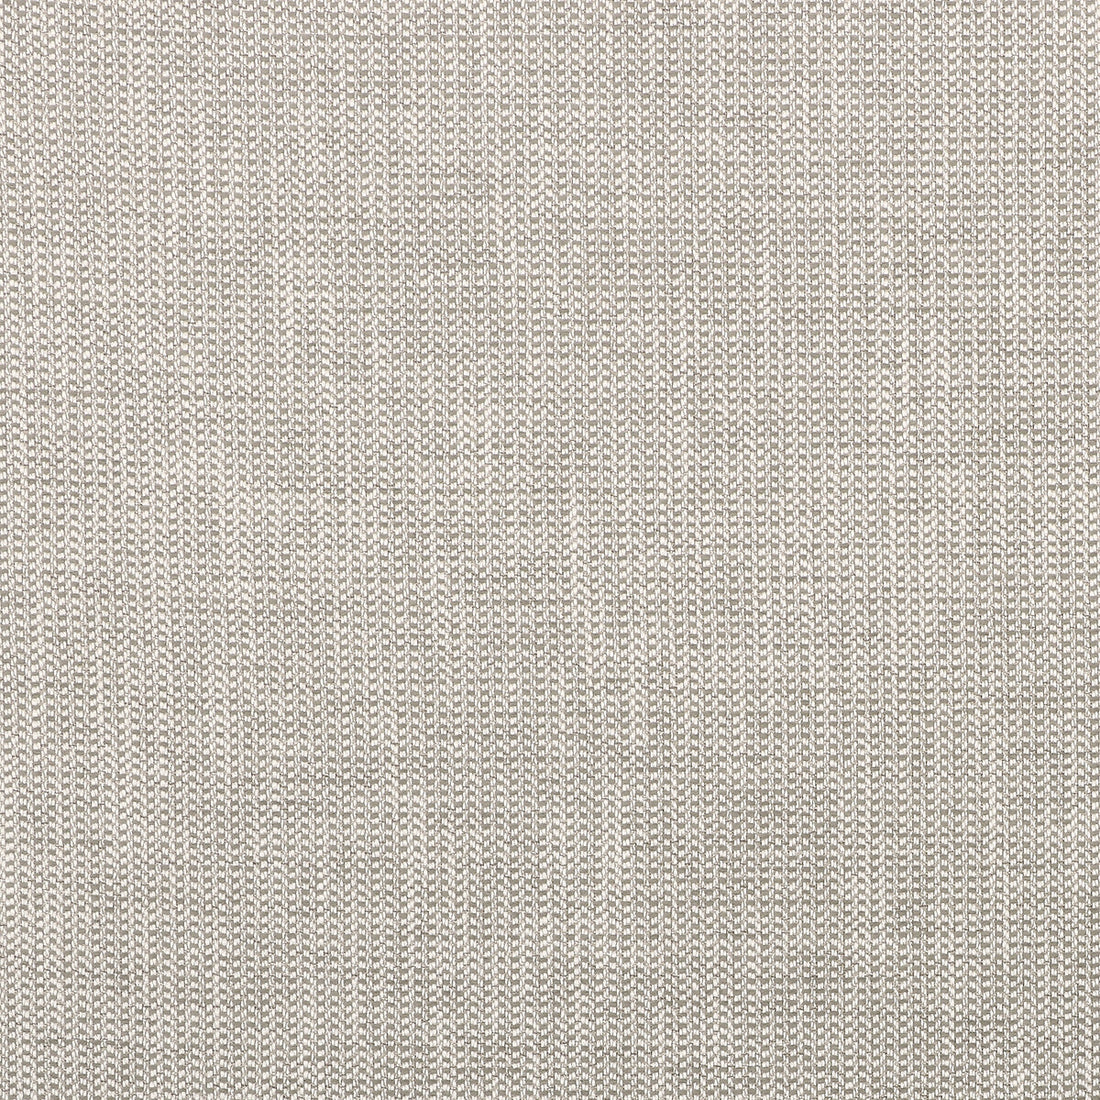 Kravet Smart fabric in 35514-11 color - pattern 35514.11.0 - by Kravet Smart in the Inside Out Performance Fabrics collection